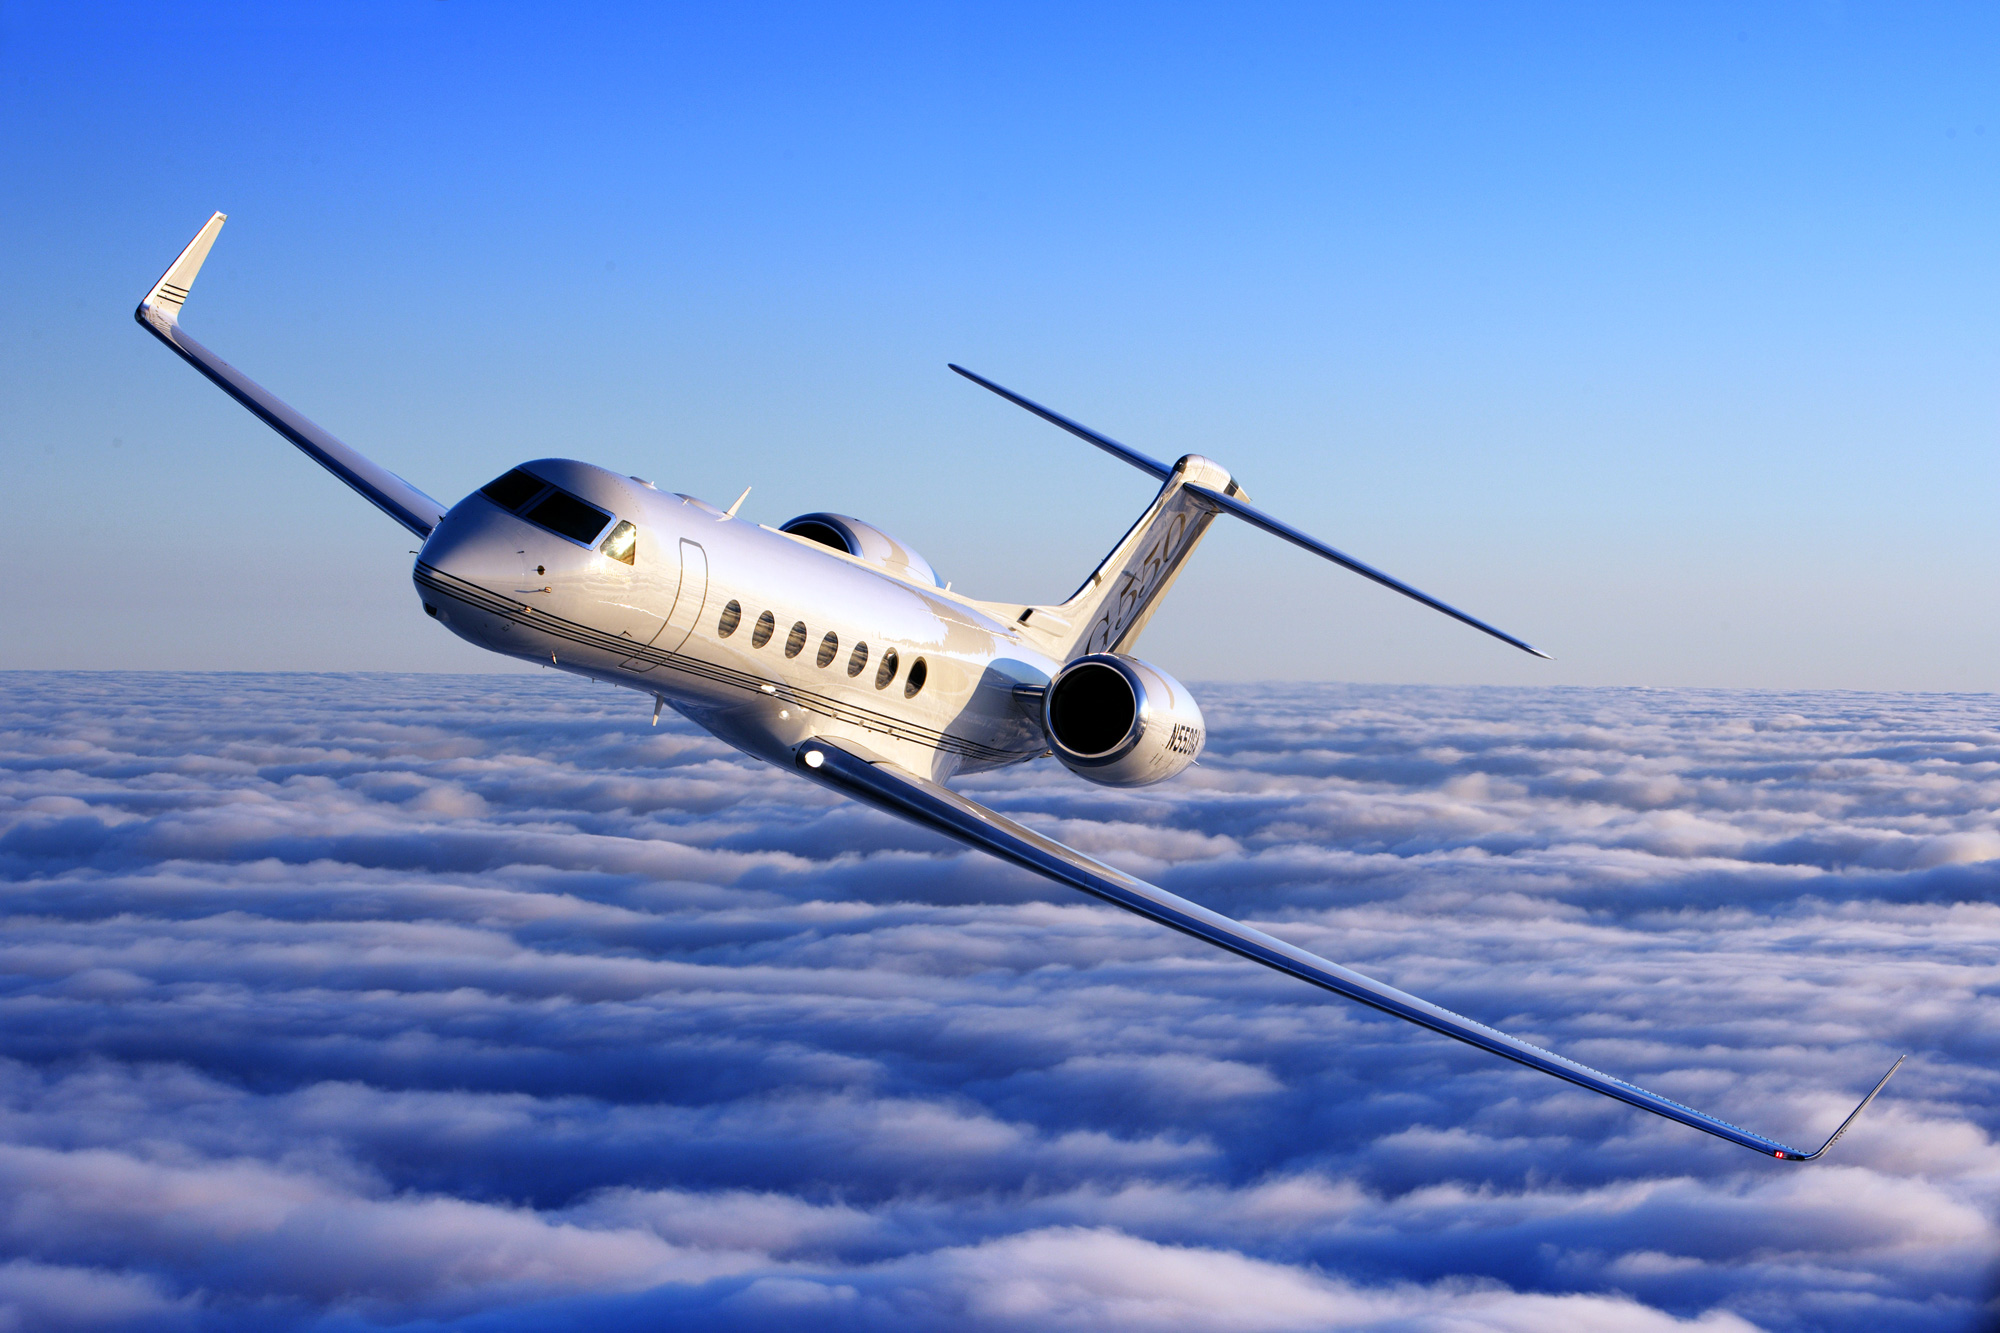 Large Jets Give Lift to U.S. Bizav Flying in October | Business ...